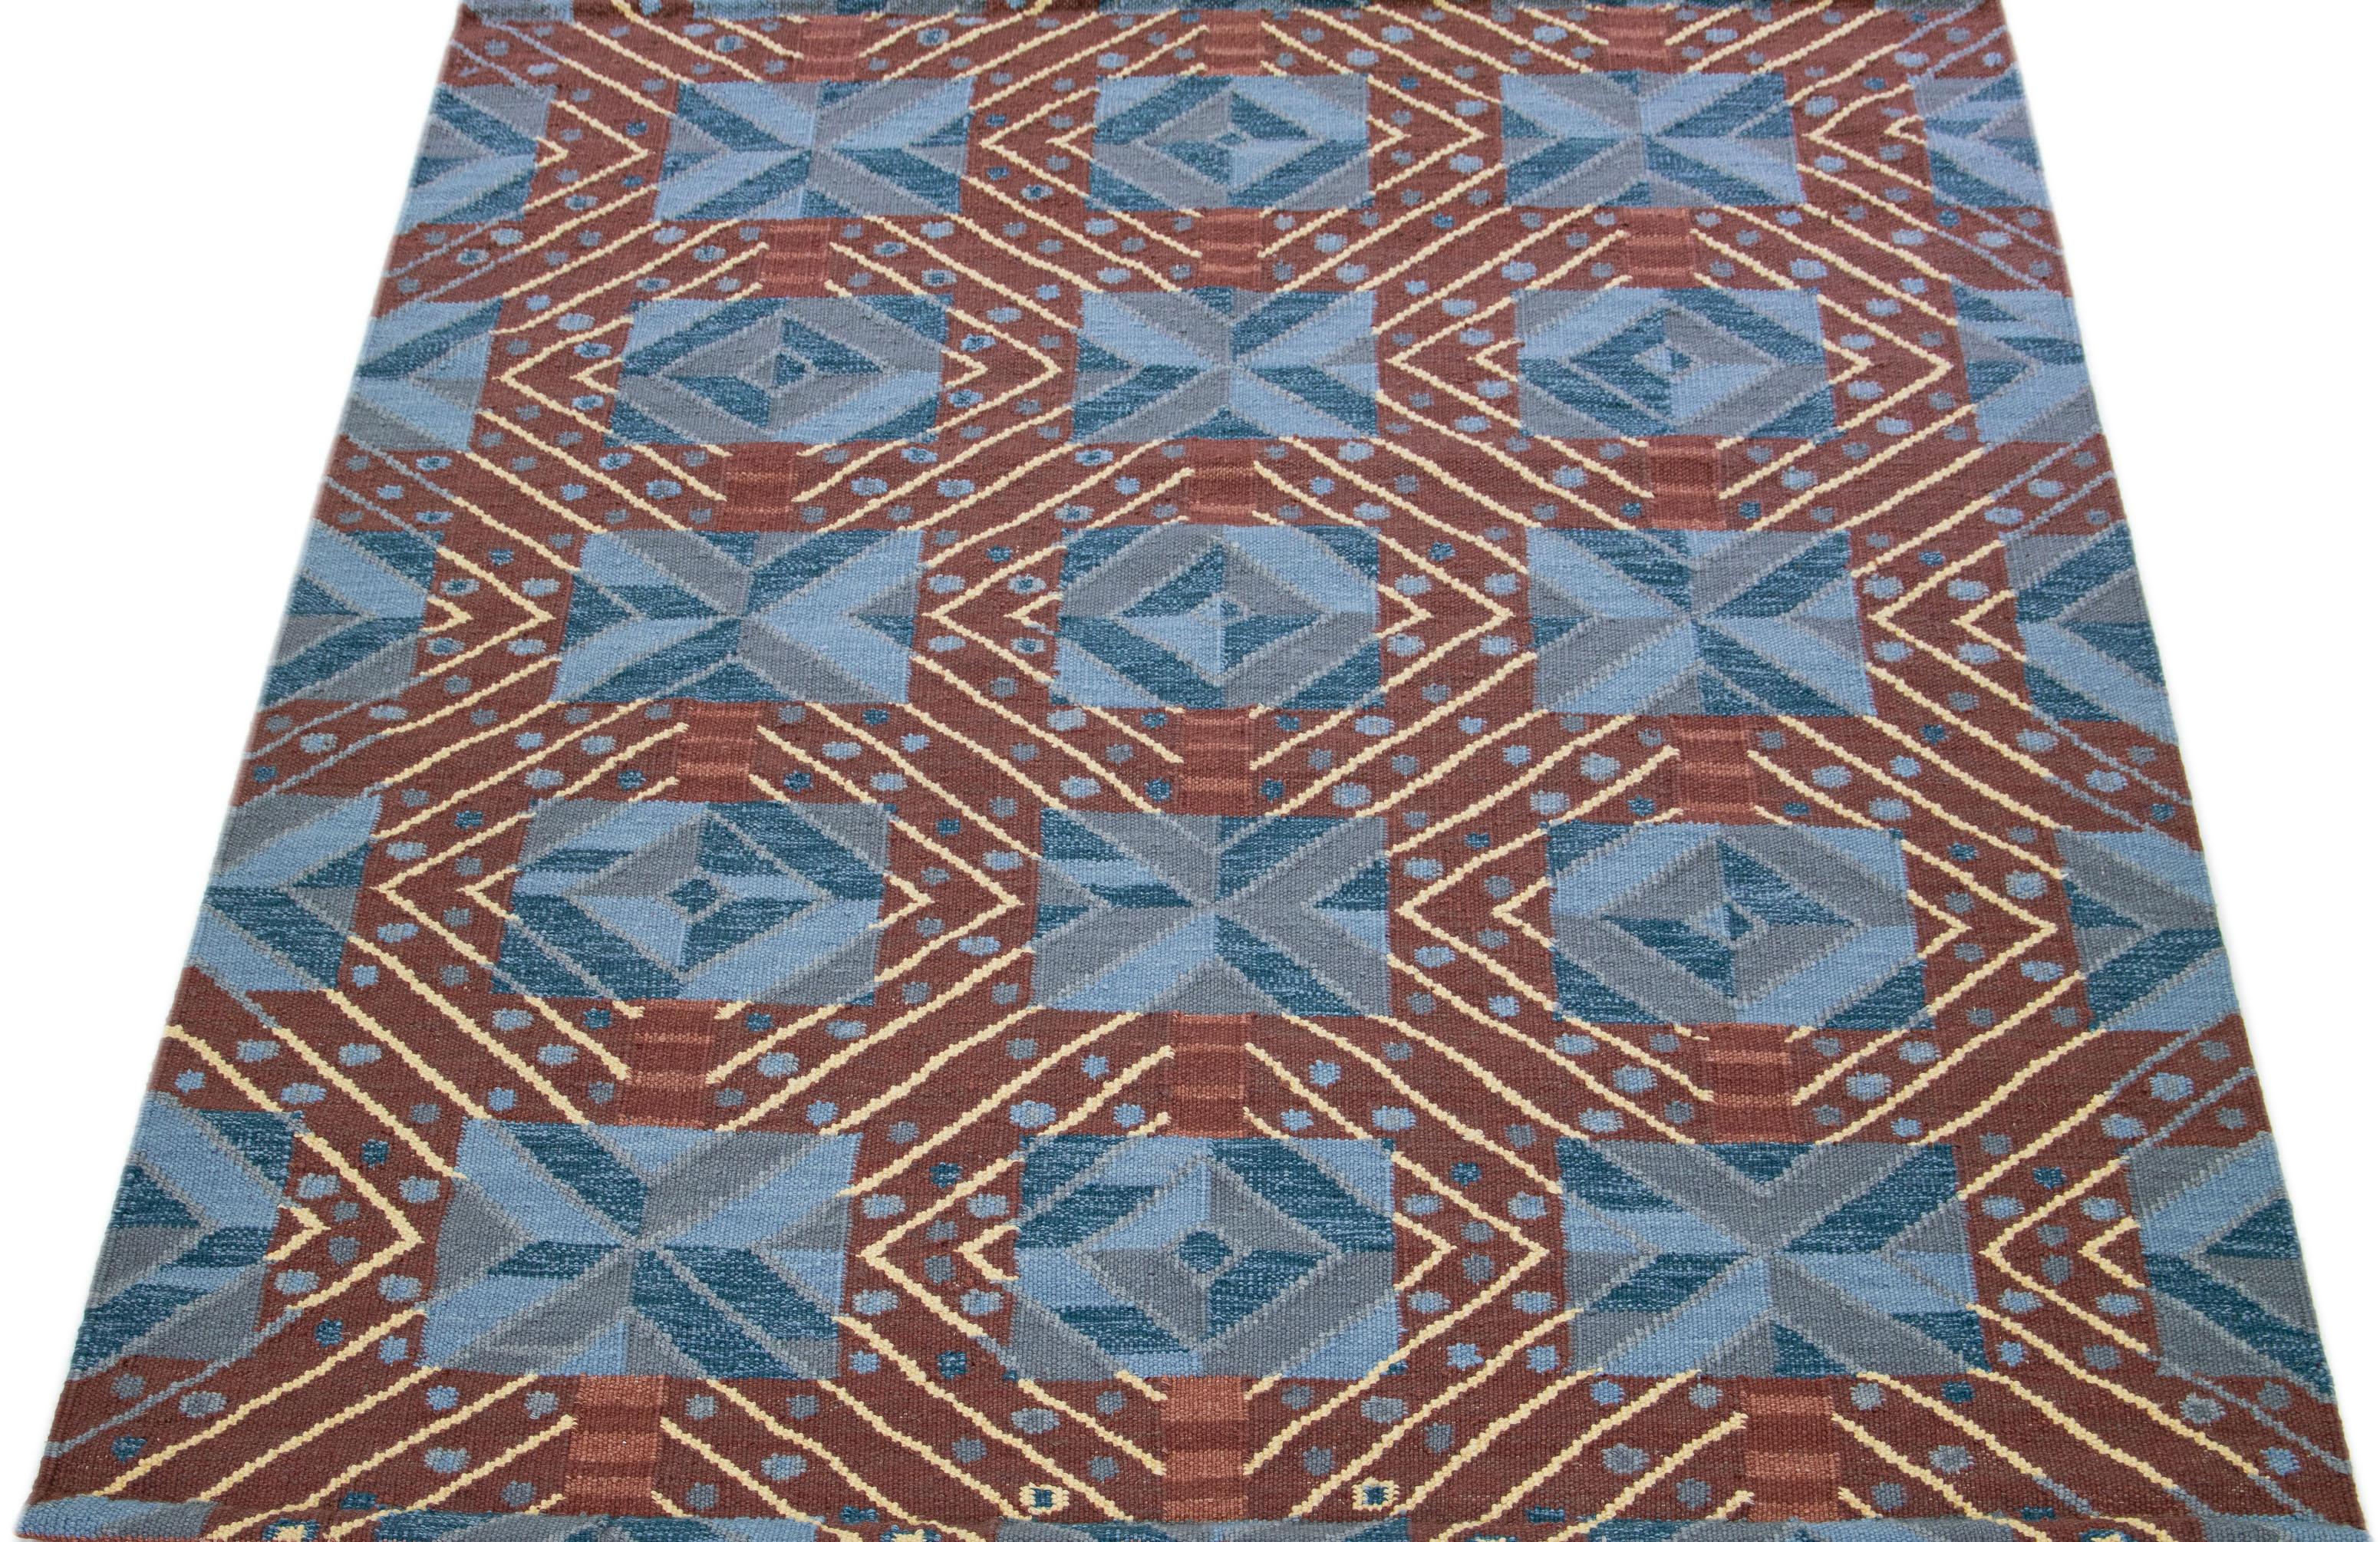 Featuring a captivating blue backdrop, this modern wool rug takes inspiration from the refined Swedish design. The attractive brown geometric pattern further enhances its exquisite beauty, making it a magnificent display of Swedish-style